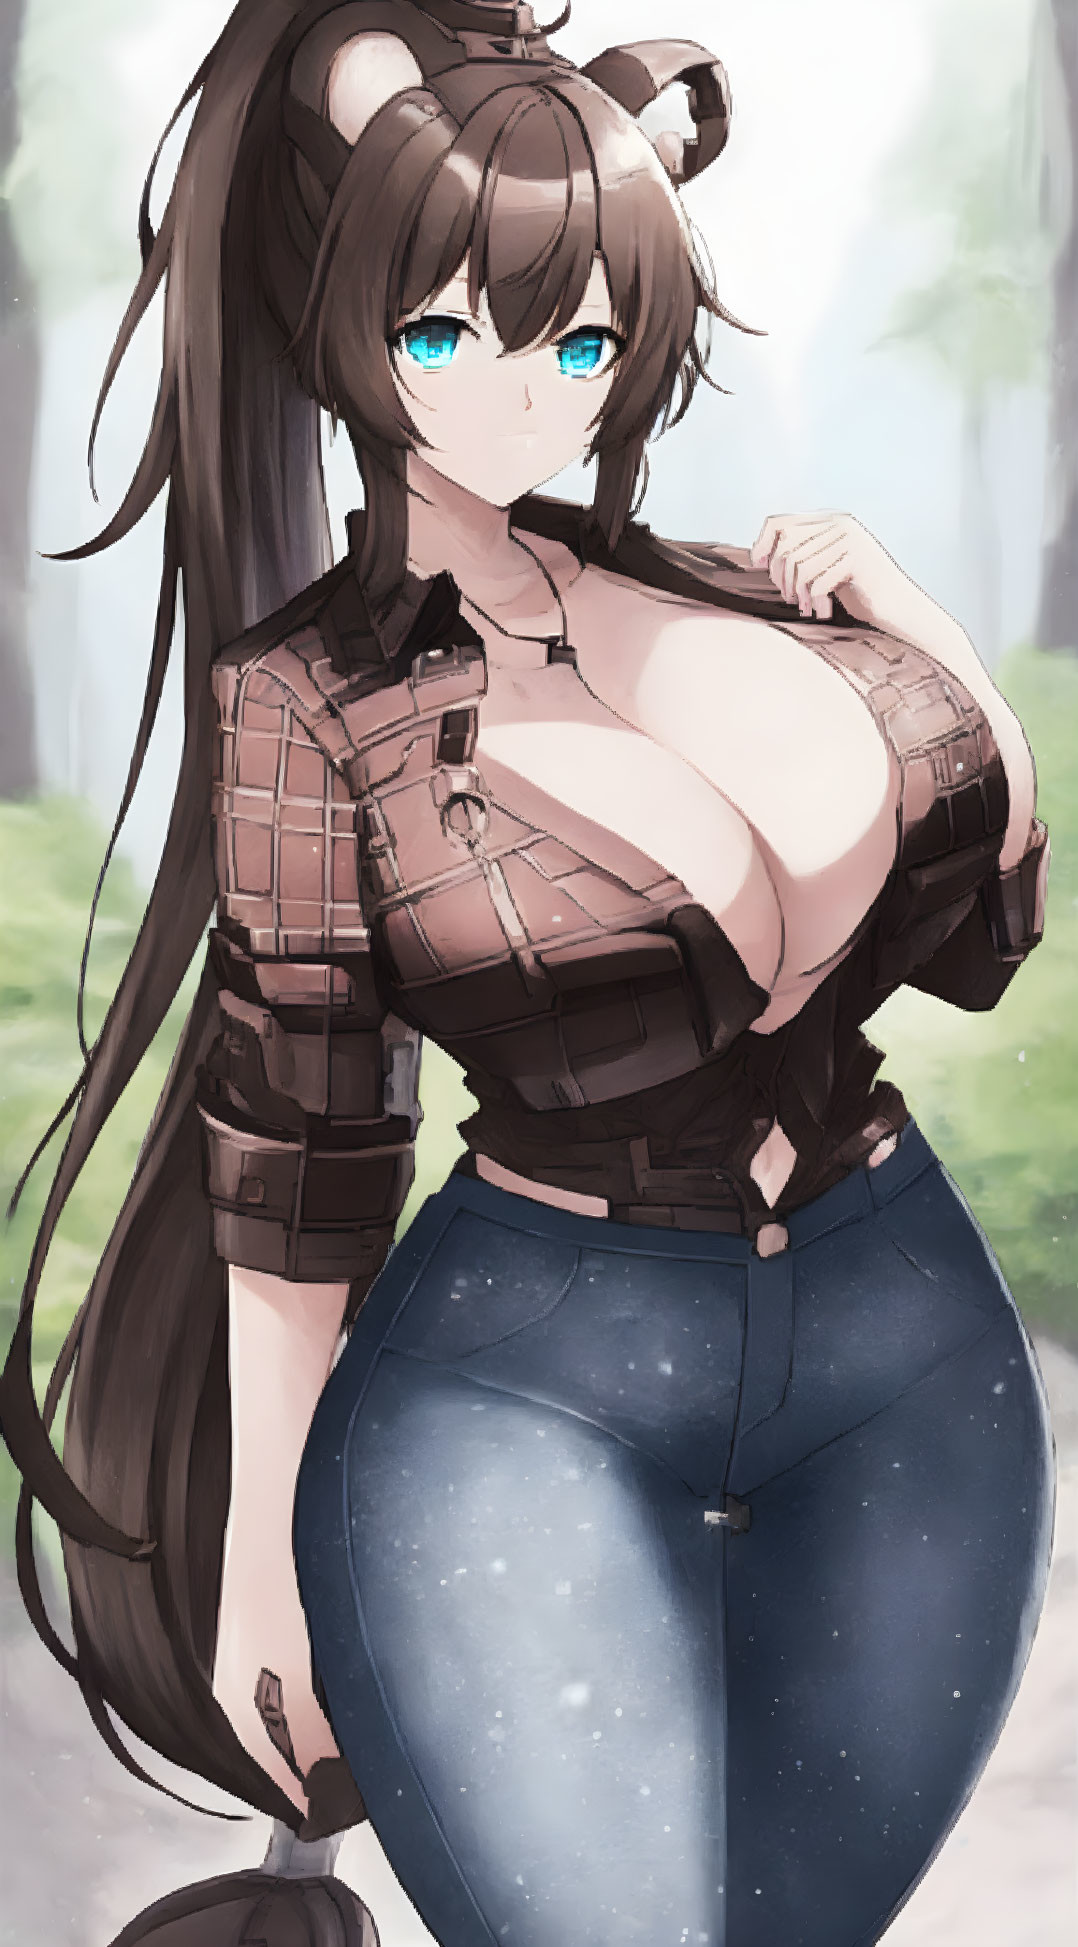 Female anime character with long black hair and blue eyes in brown chest armor and blue denim pants in forest